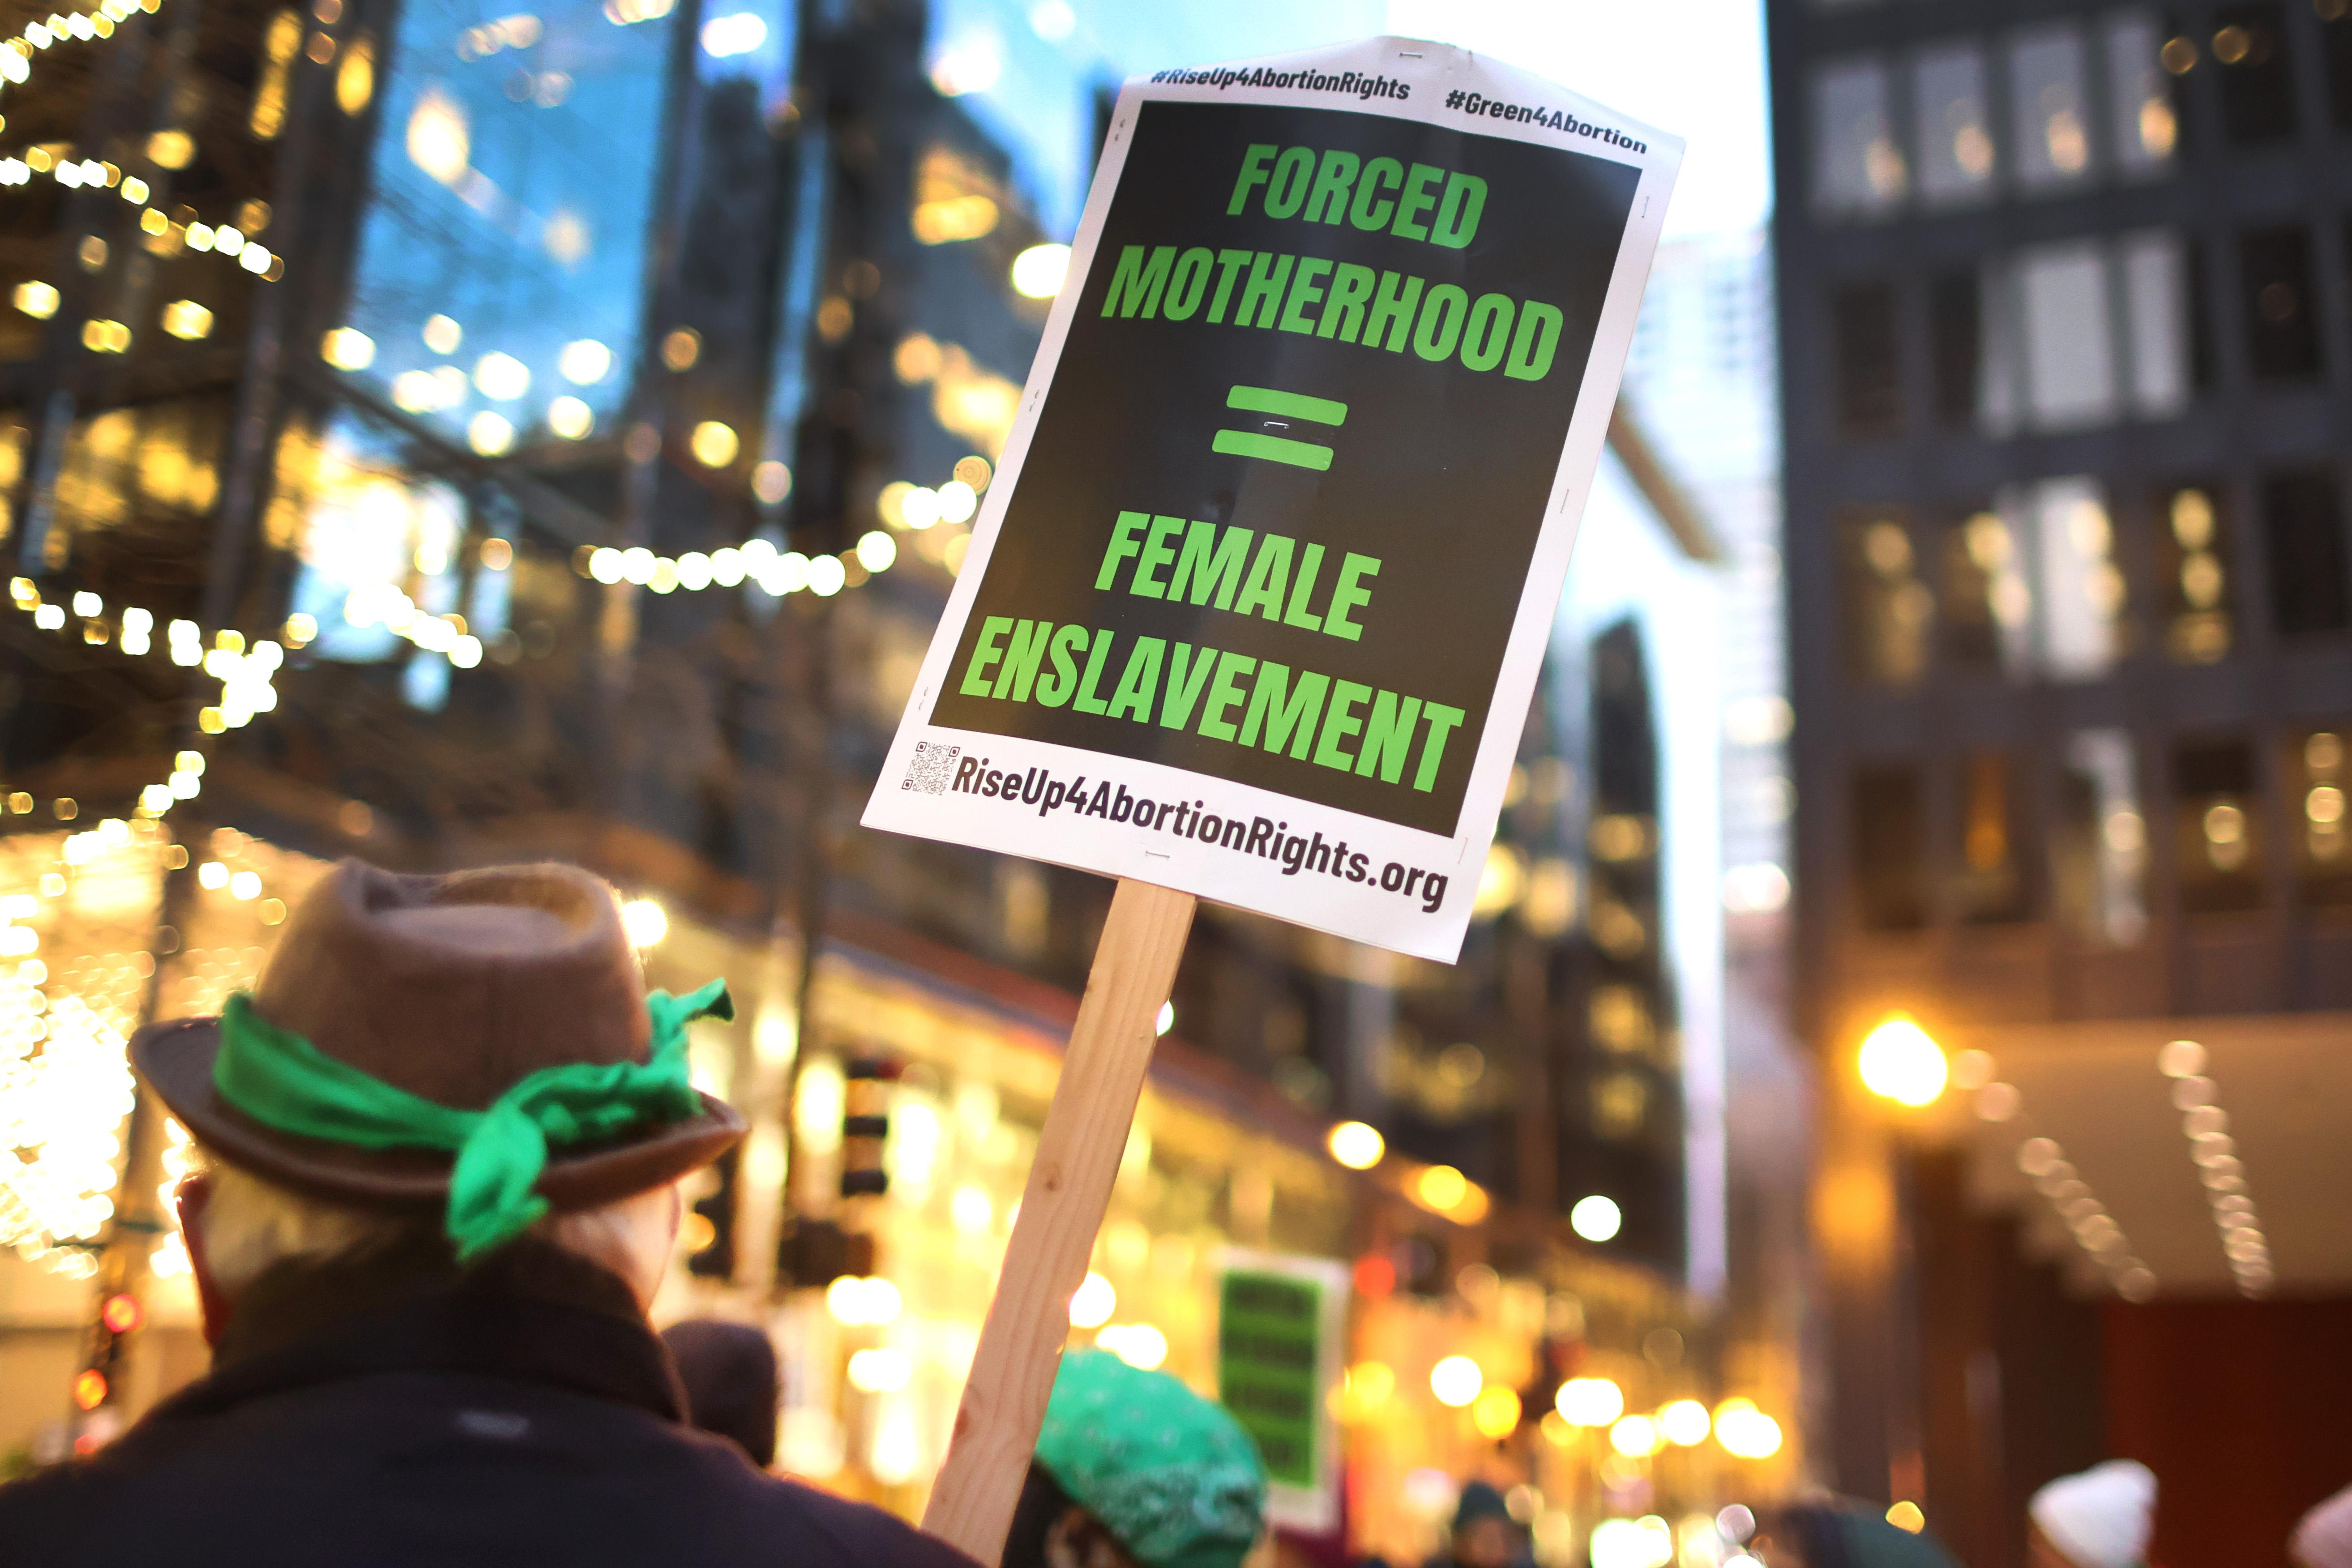 The sign says "Forced Motherhood = Female Enslavement."